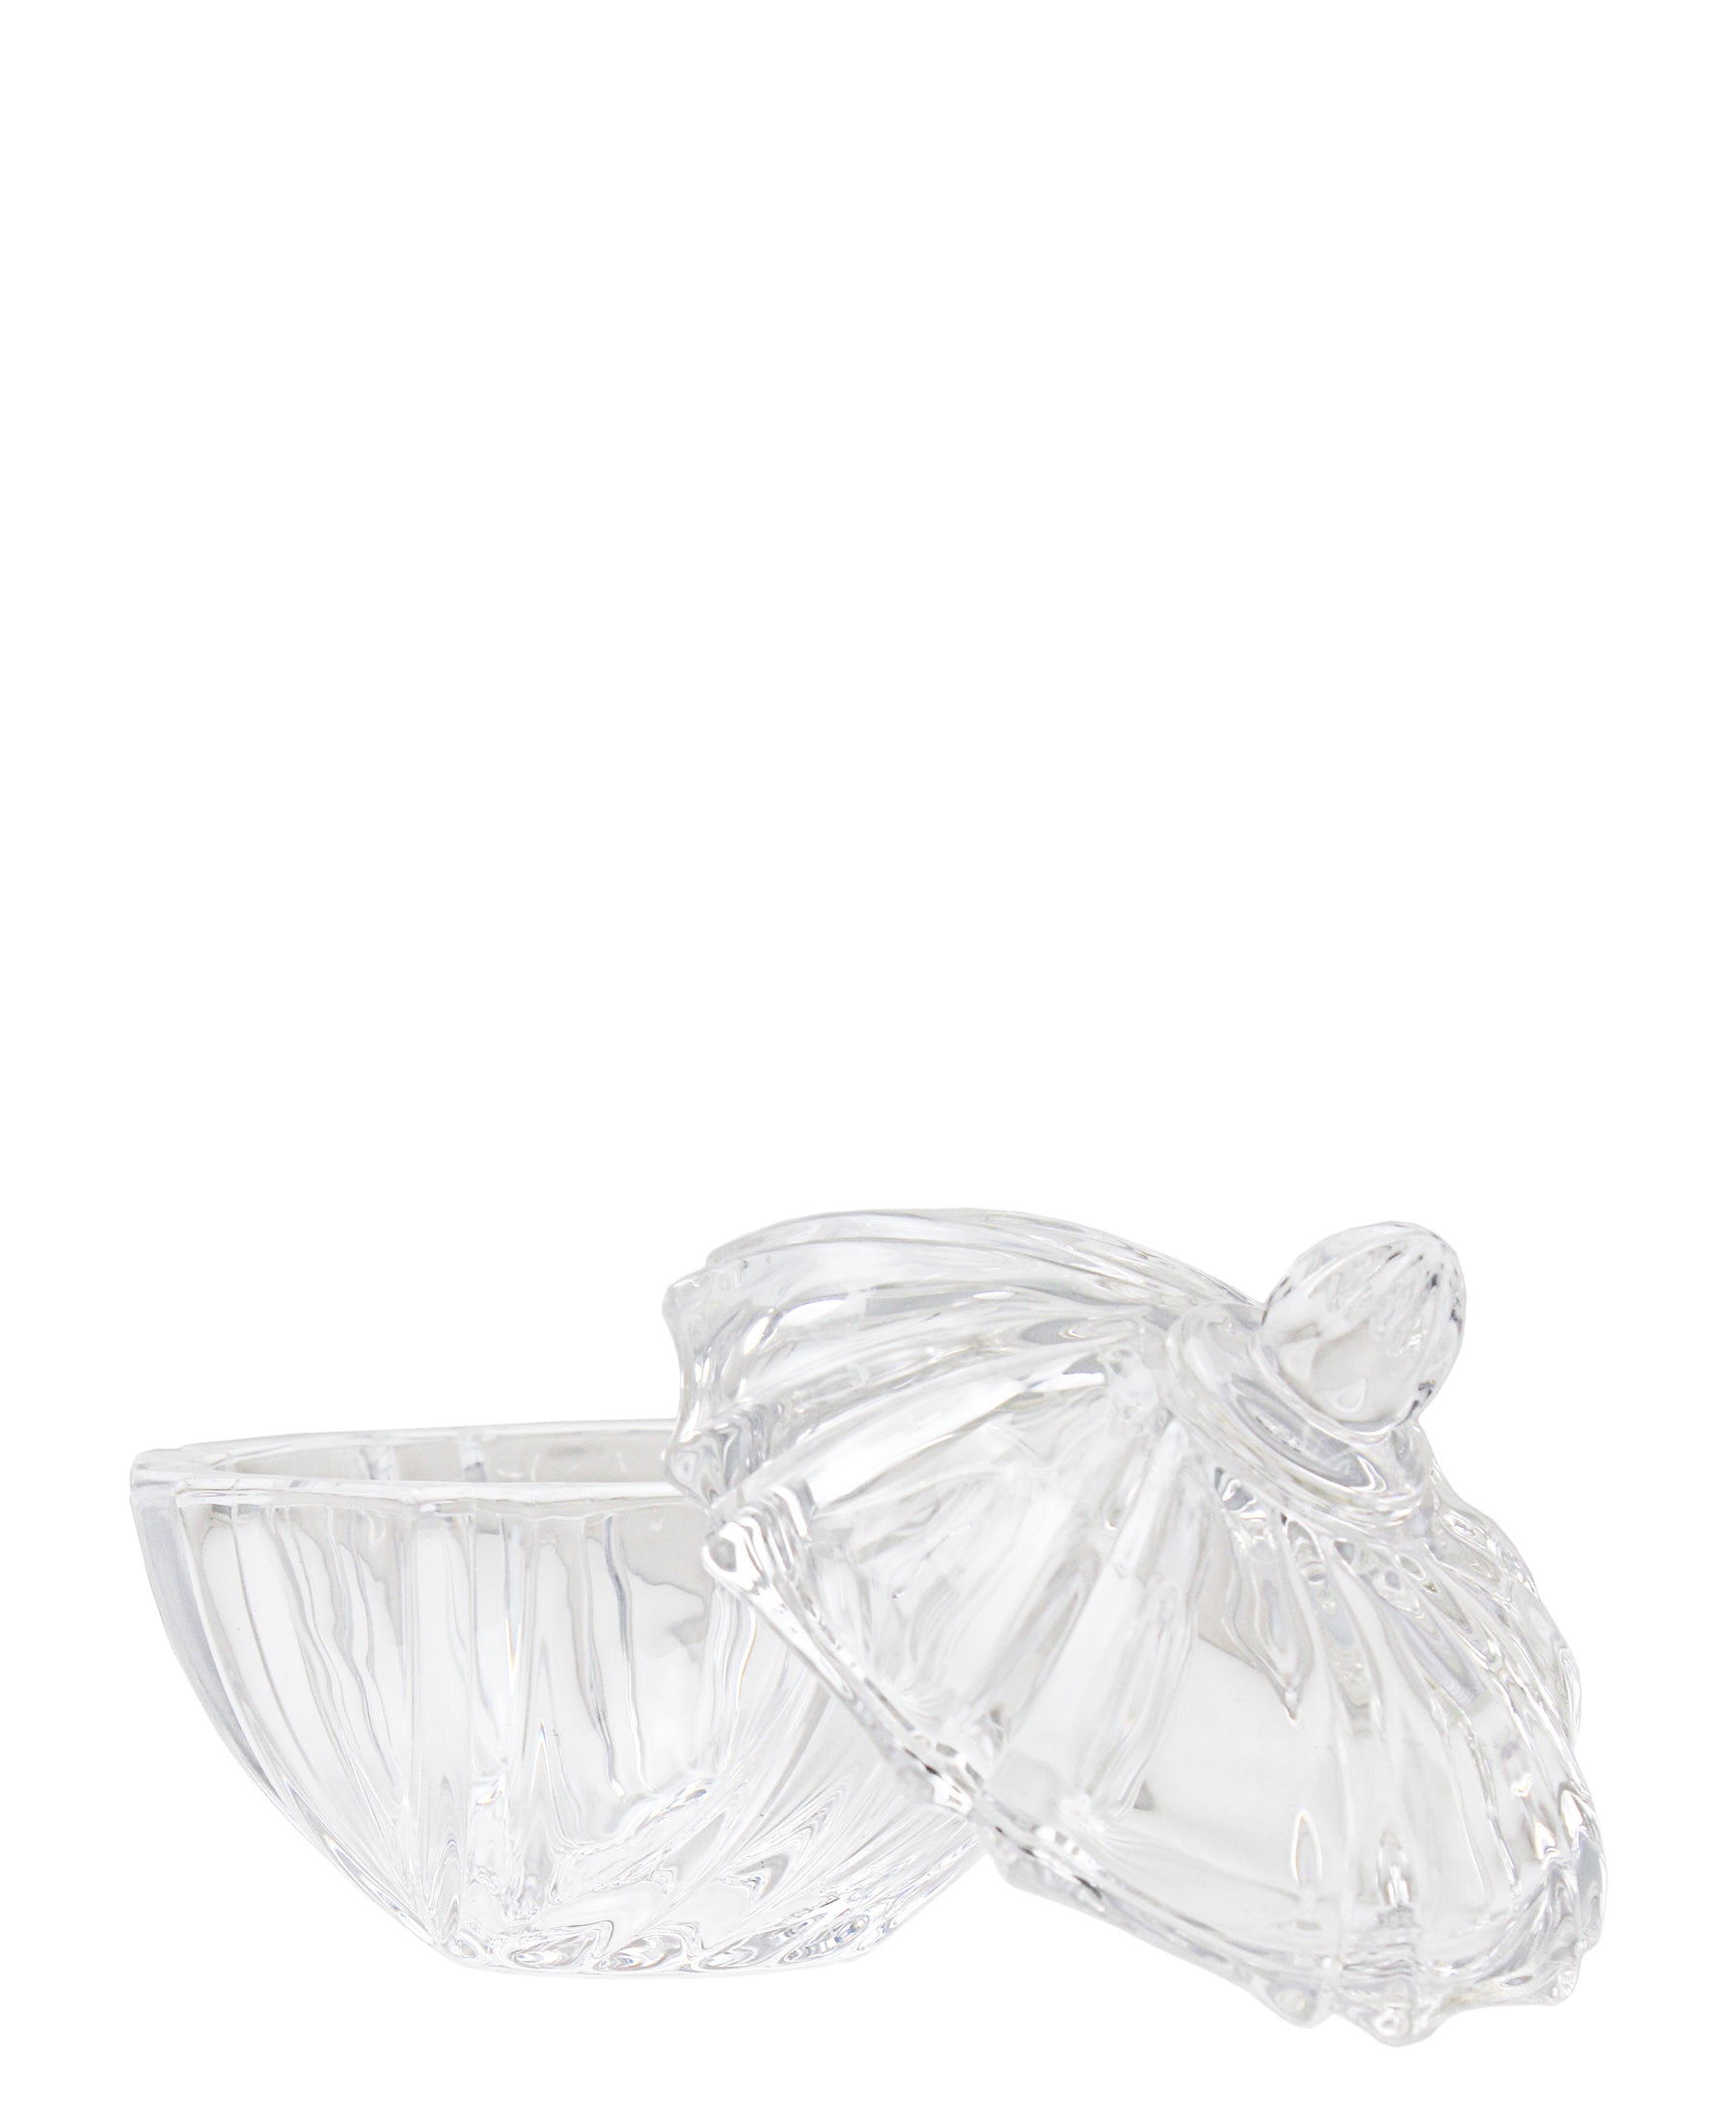 Kitchen Life Crystal Bowl With Lid - Clear